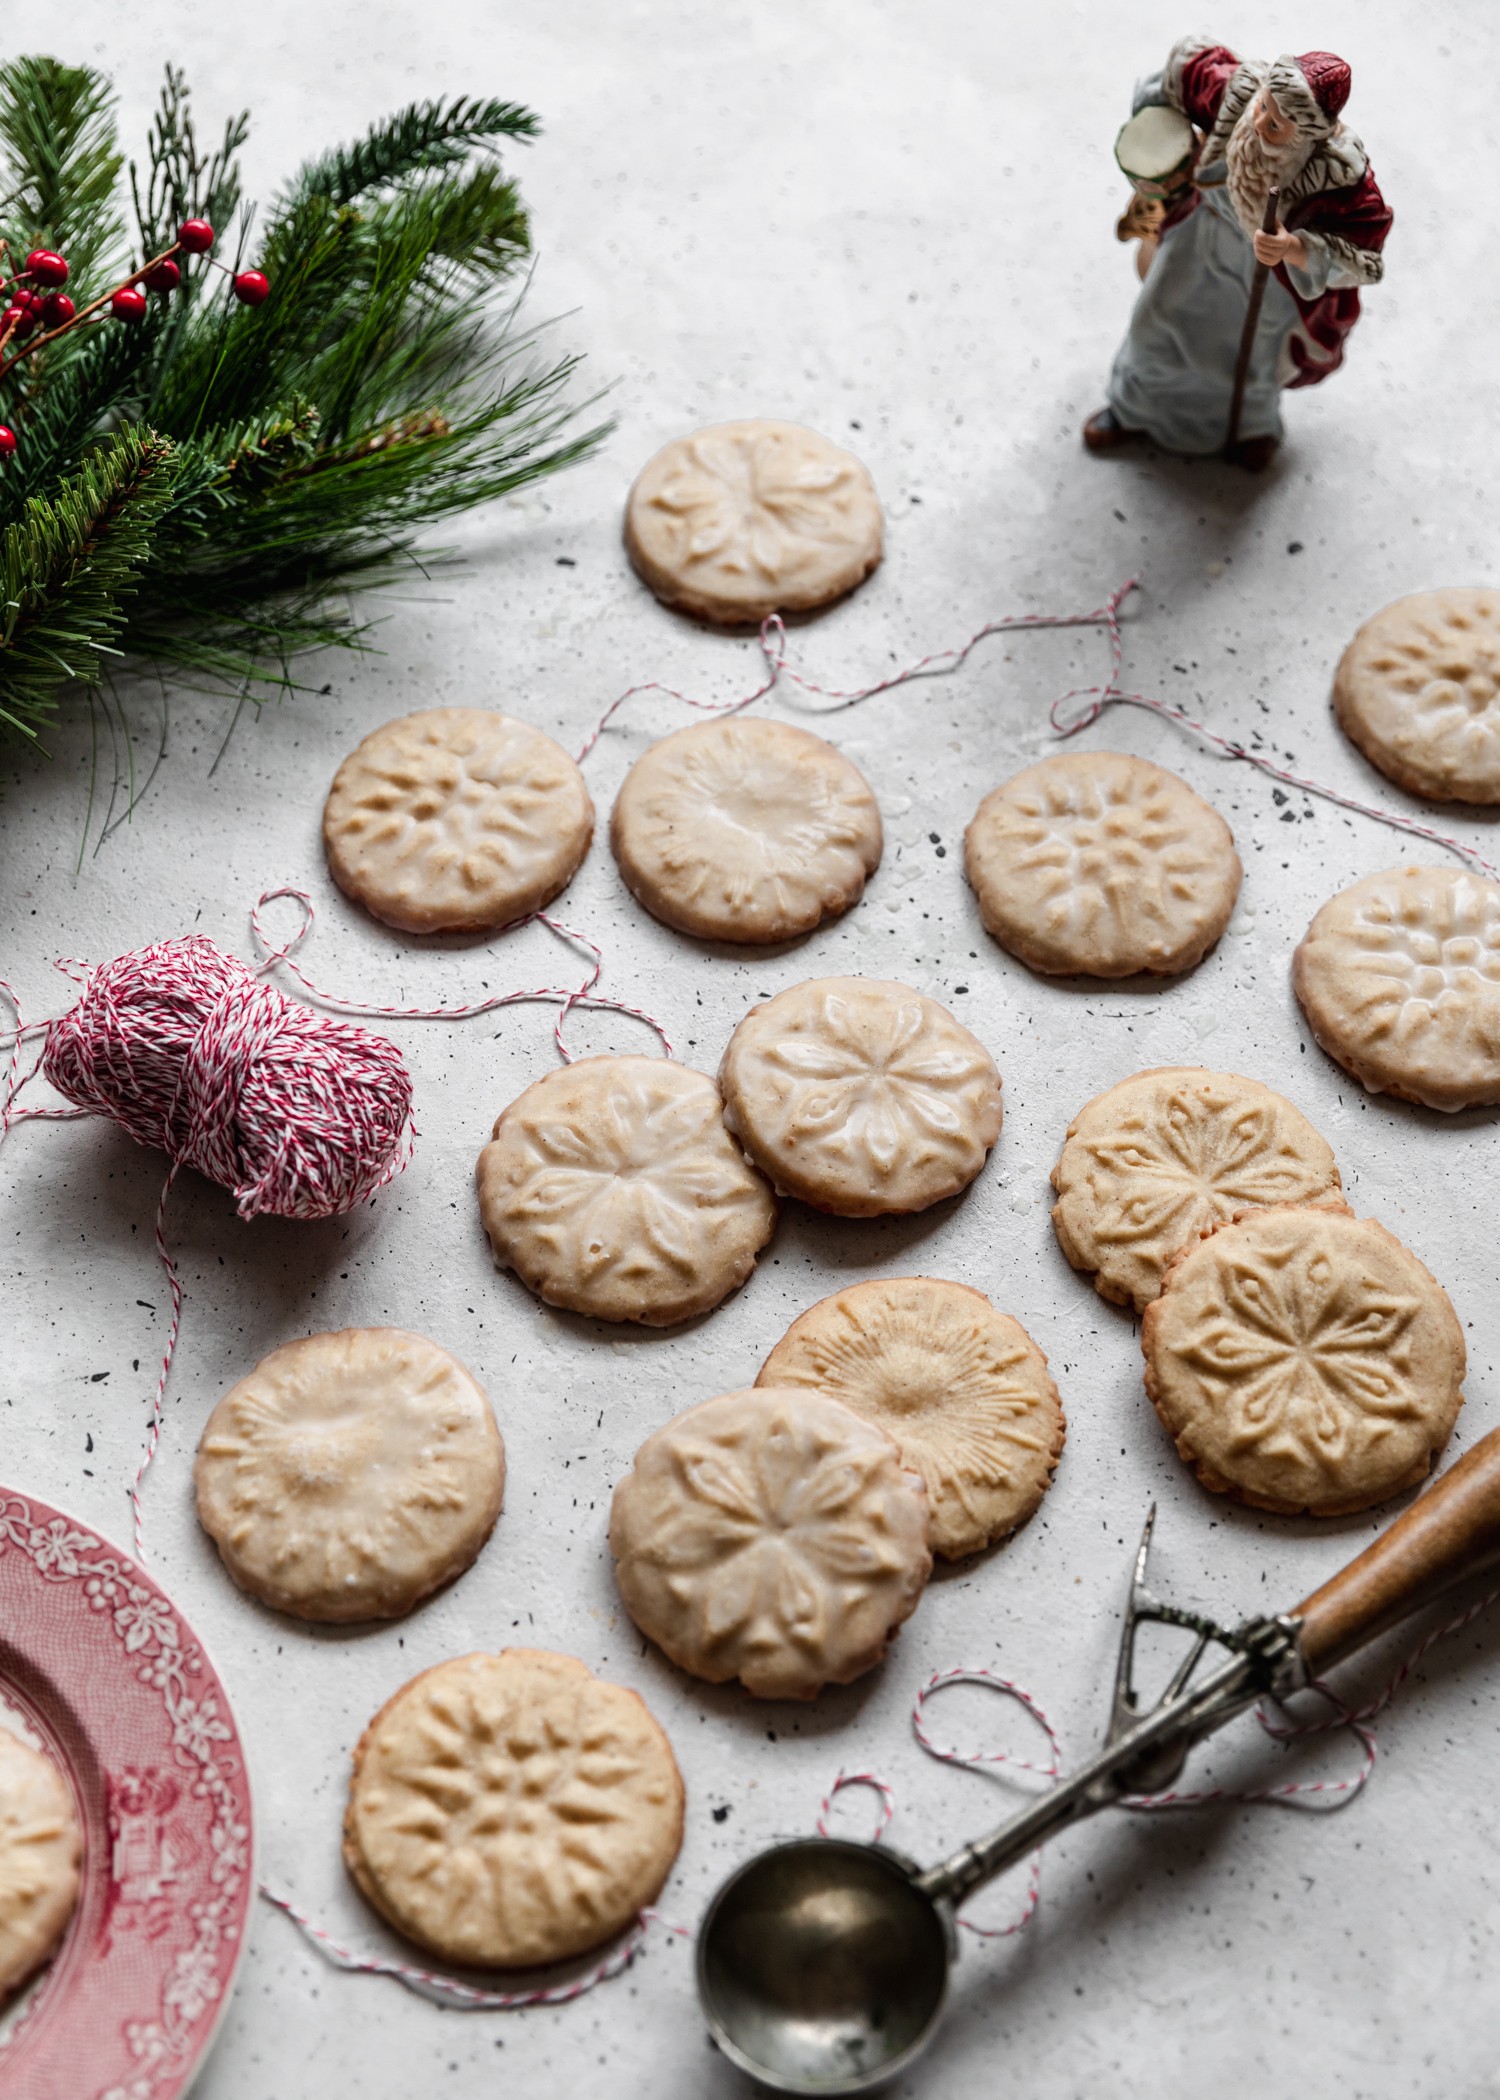 A side image of eggnog cookies surrounded by pine branches, a Santa figurine, and baking twine on a grey counter.